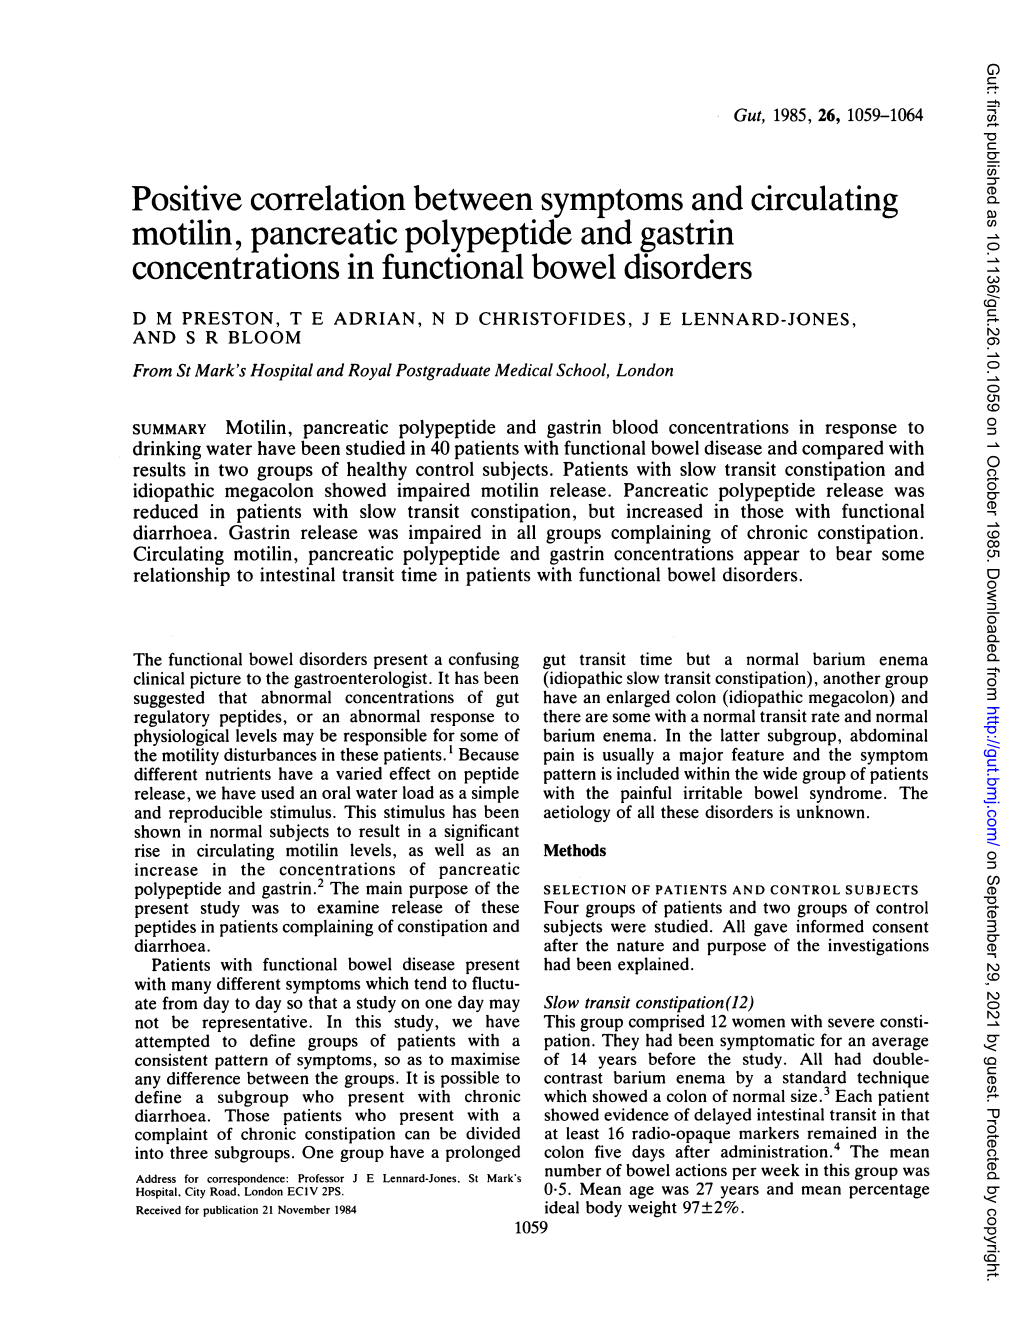 Positive Correlation Between Symptoms and Circulating Motilin, Pancreatic Polypeptide and Gastrin Concentrations in Functional Bowel Disorders